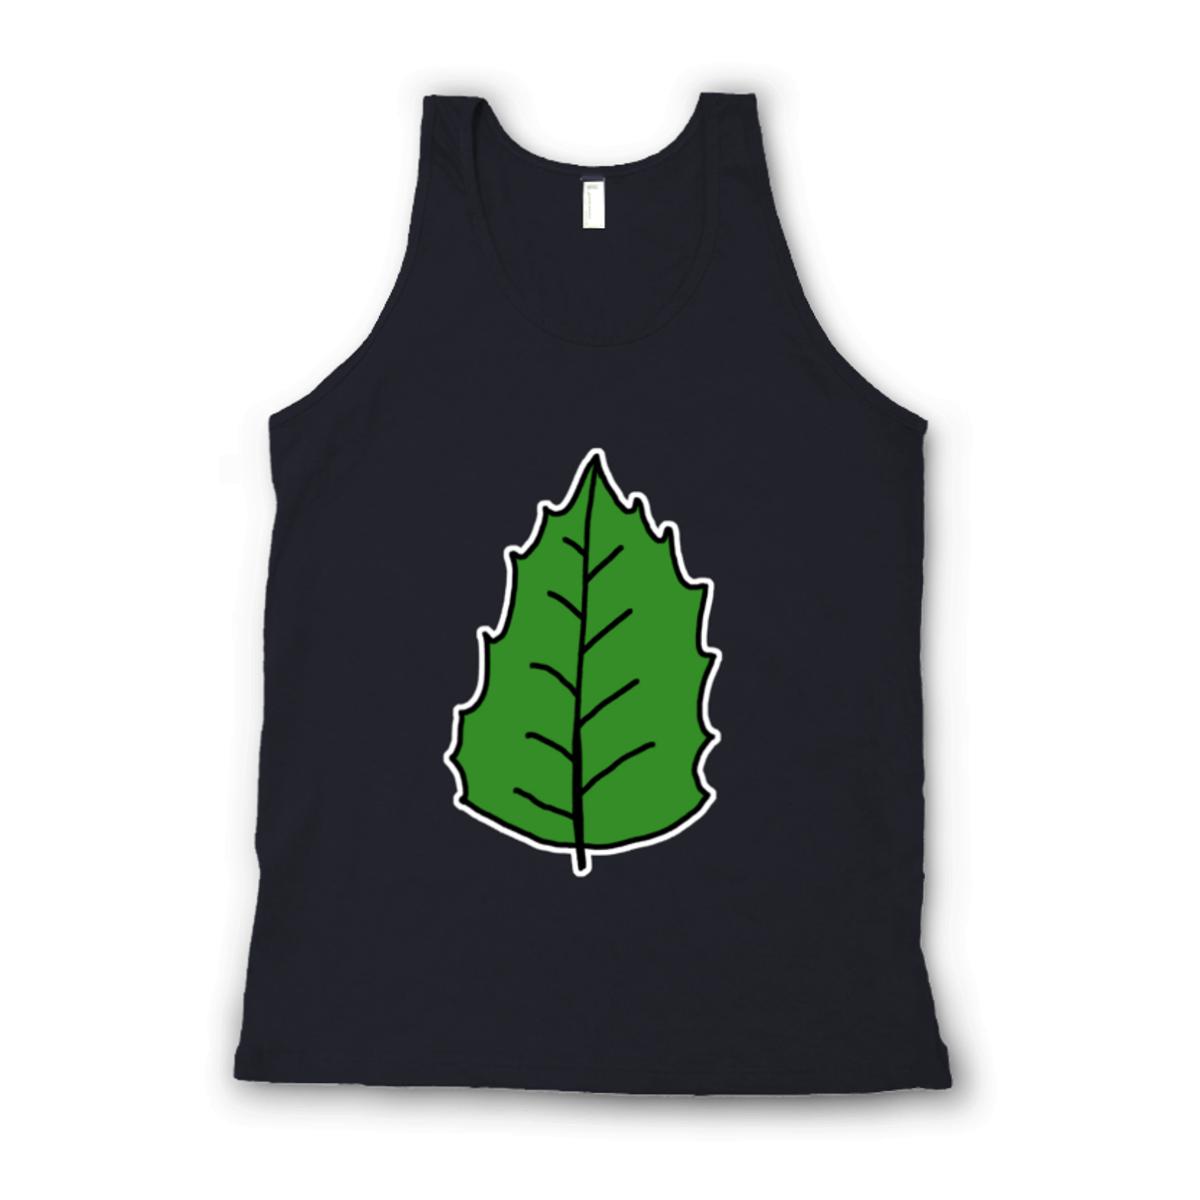 Holly Leaf Unisex Tank Top Double Extra Large black